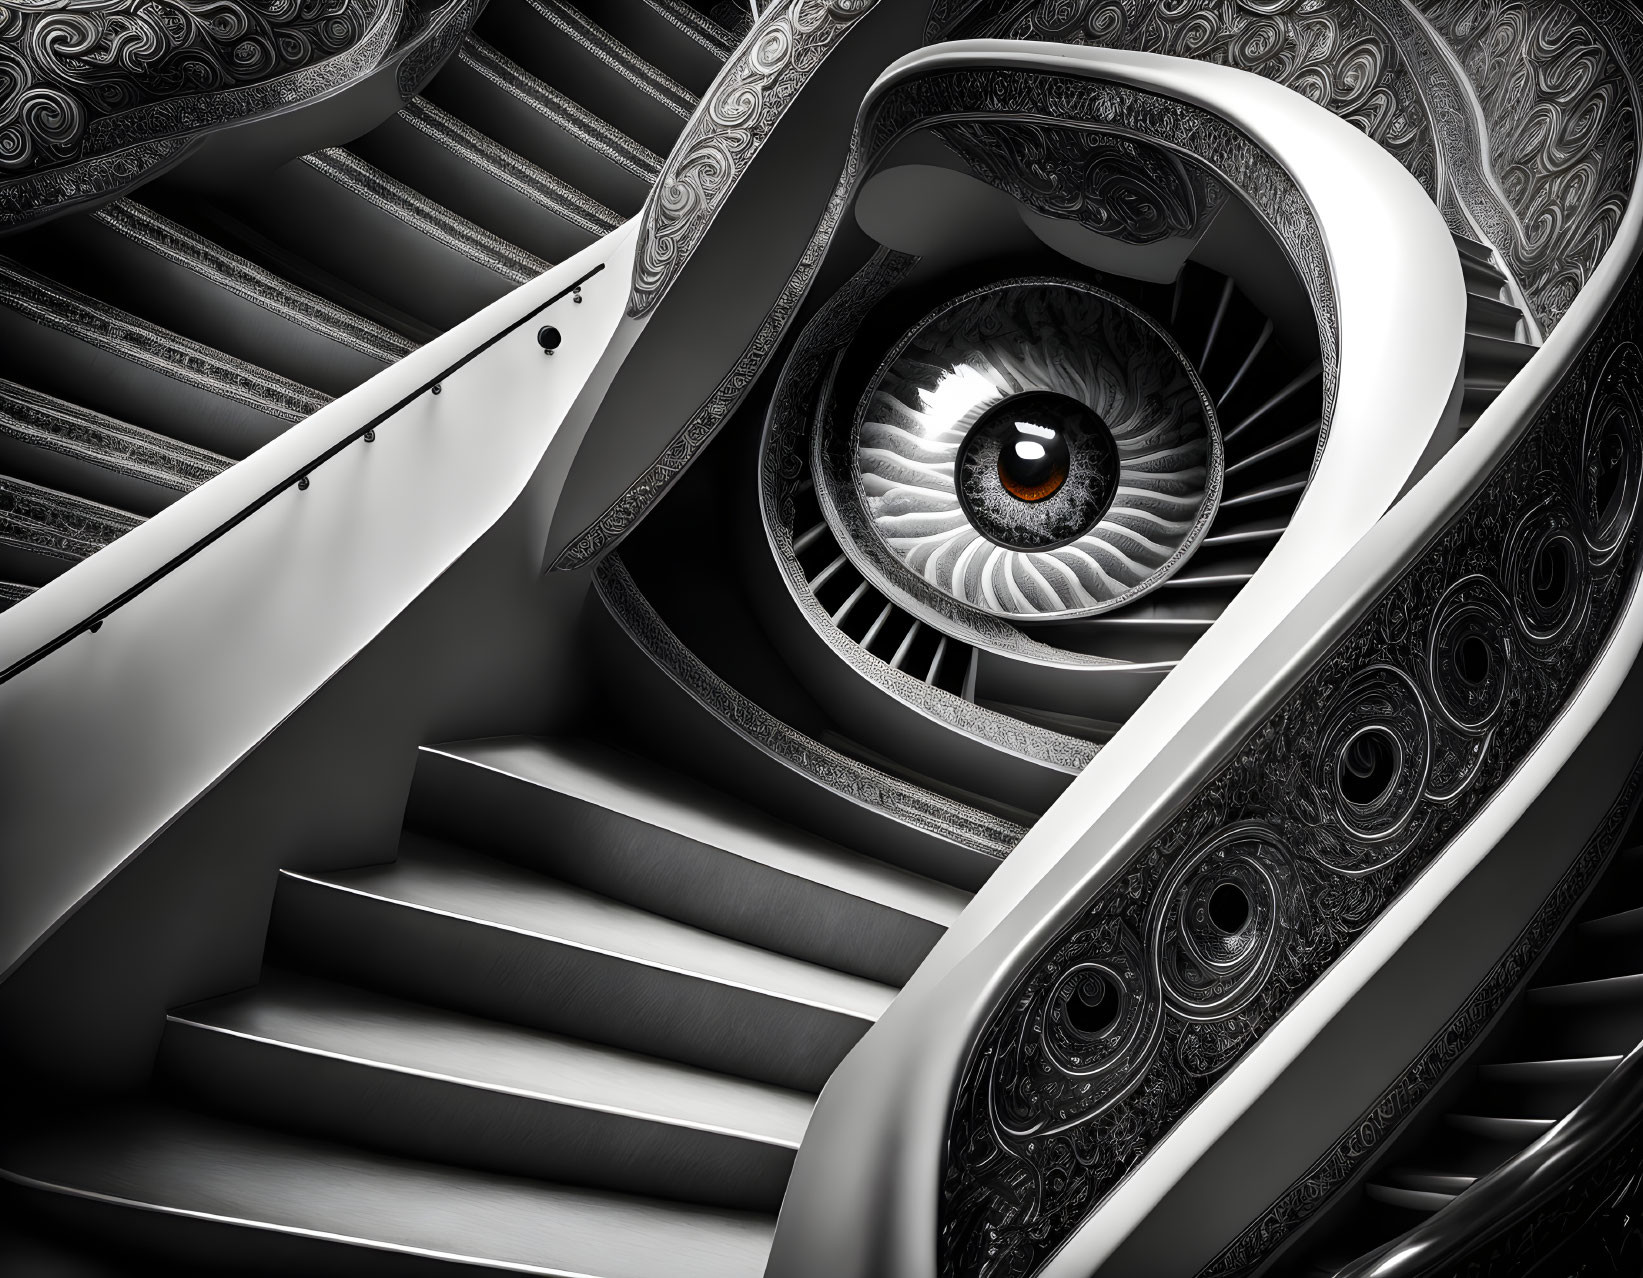 Intricate Monochromatic Fractal Stairwell Design with Eye at Center